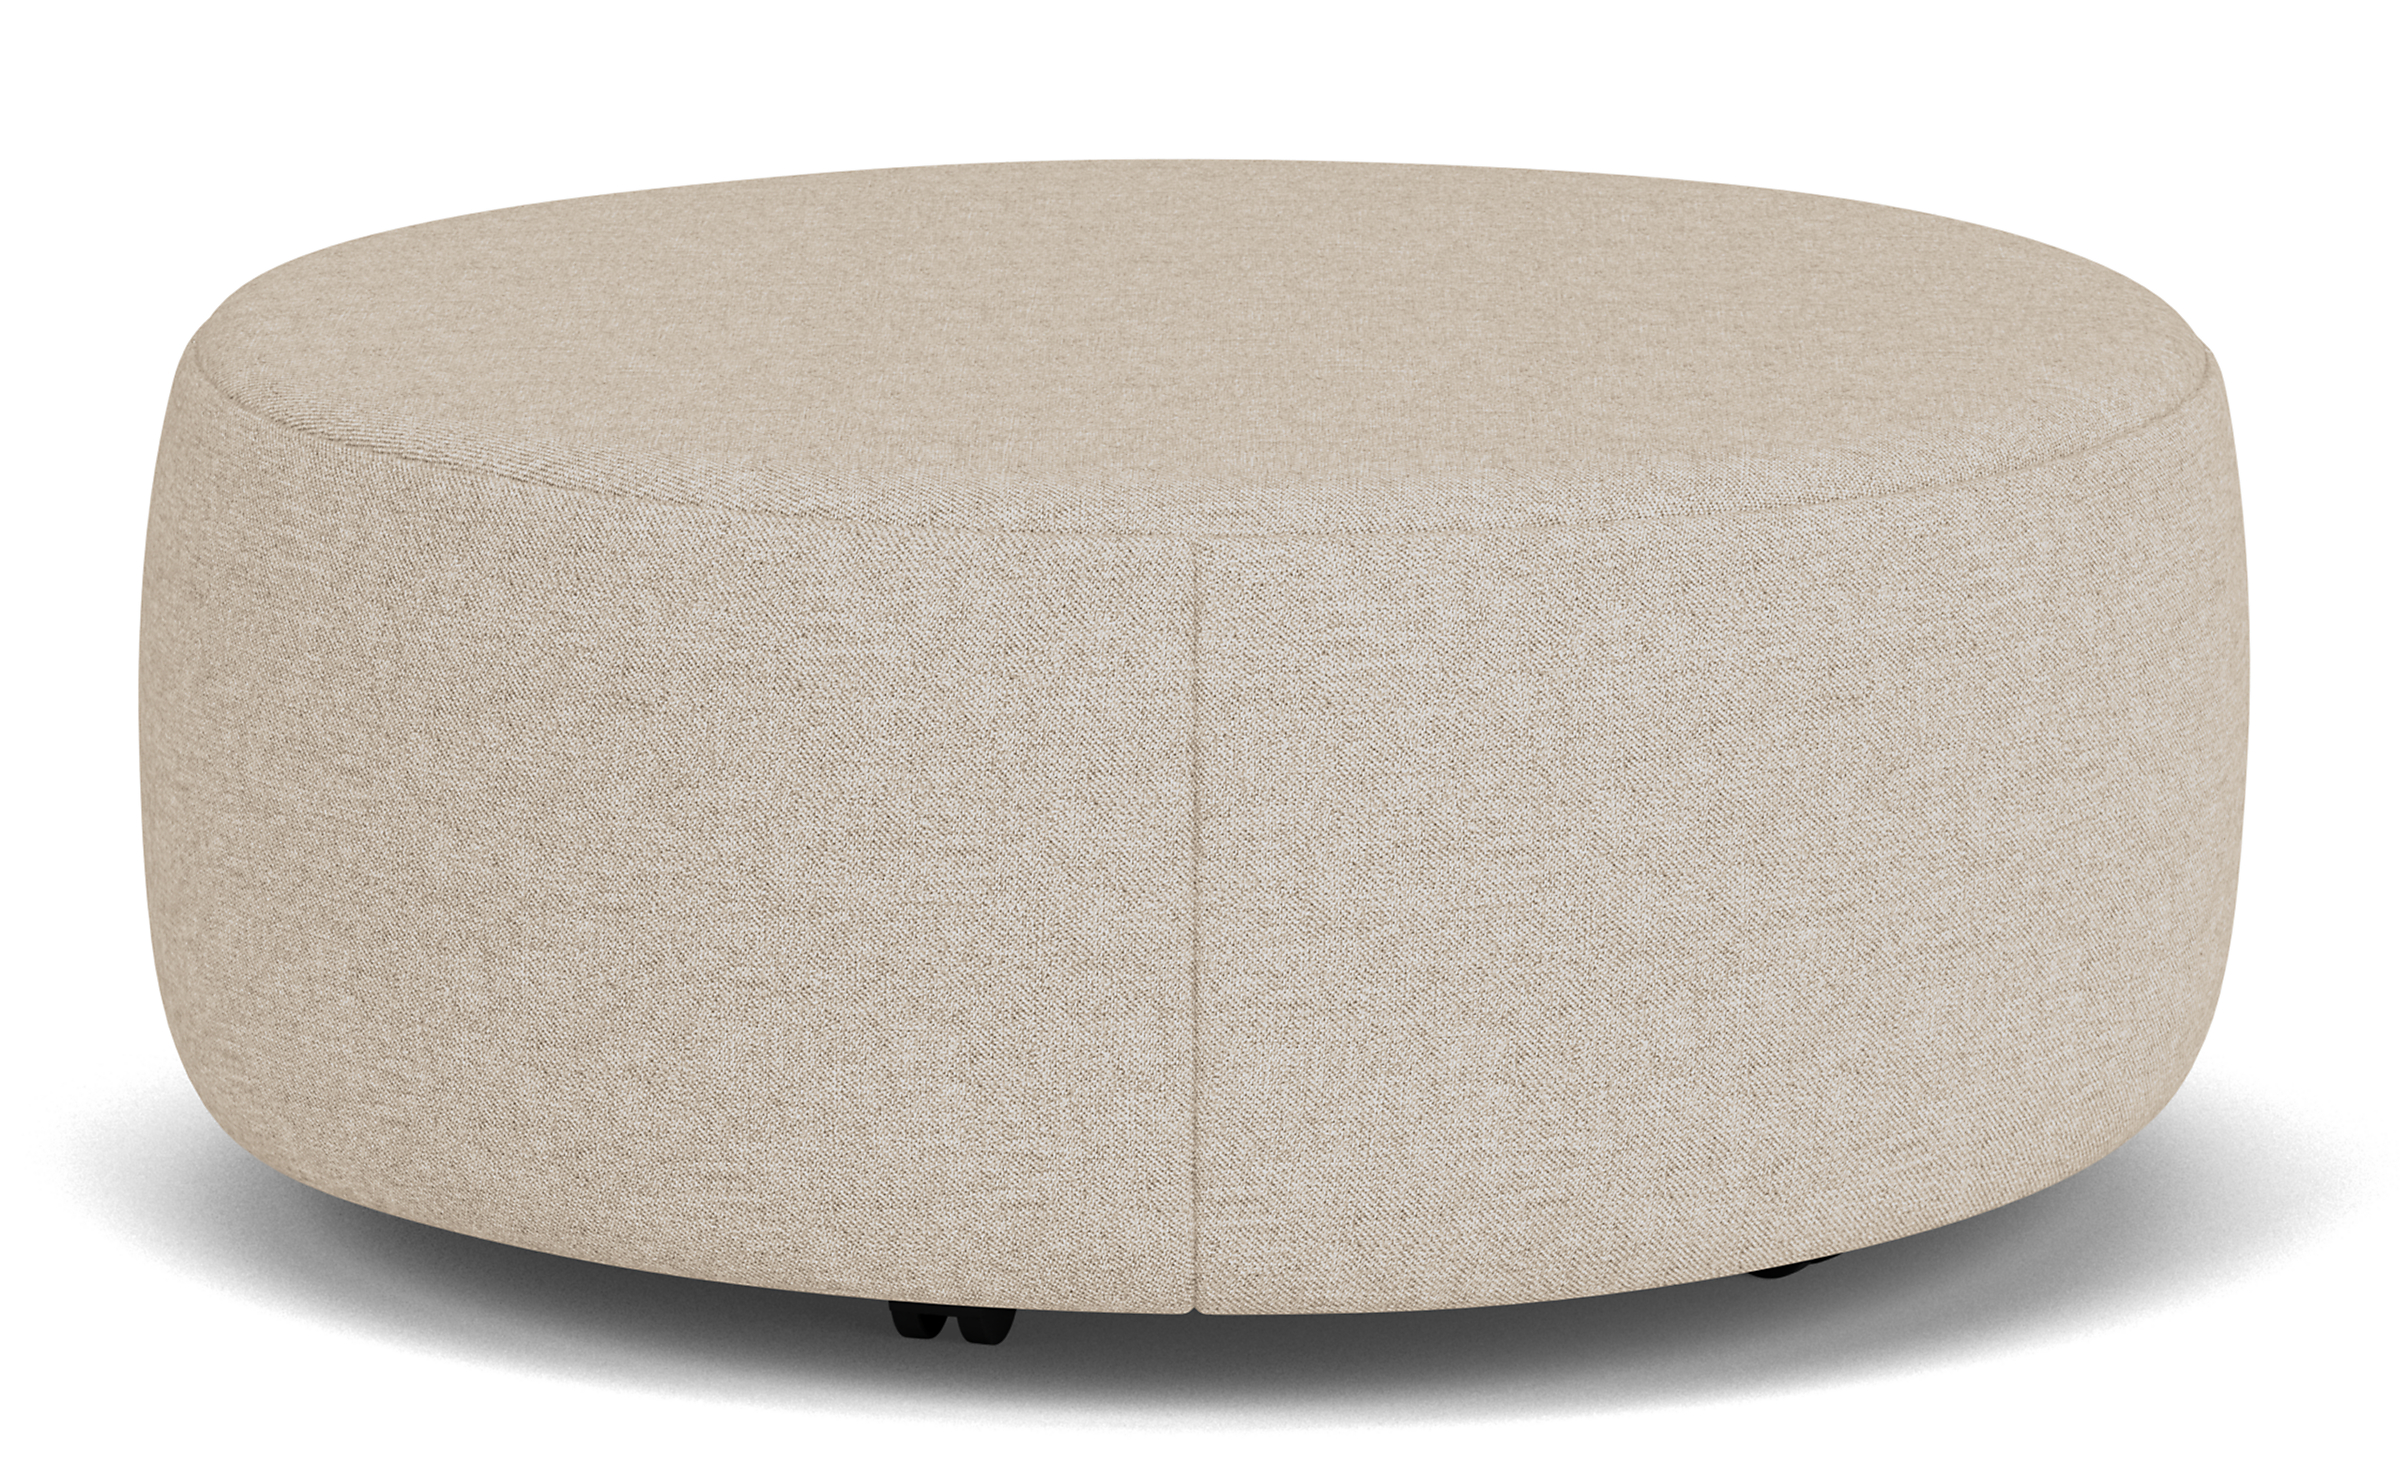 Lind 42 diam 16h Round Ottoman in Gino Oatmeal